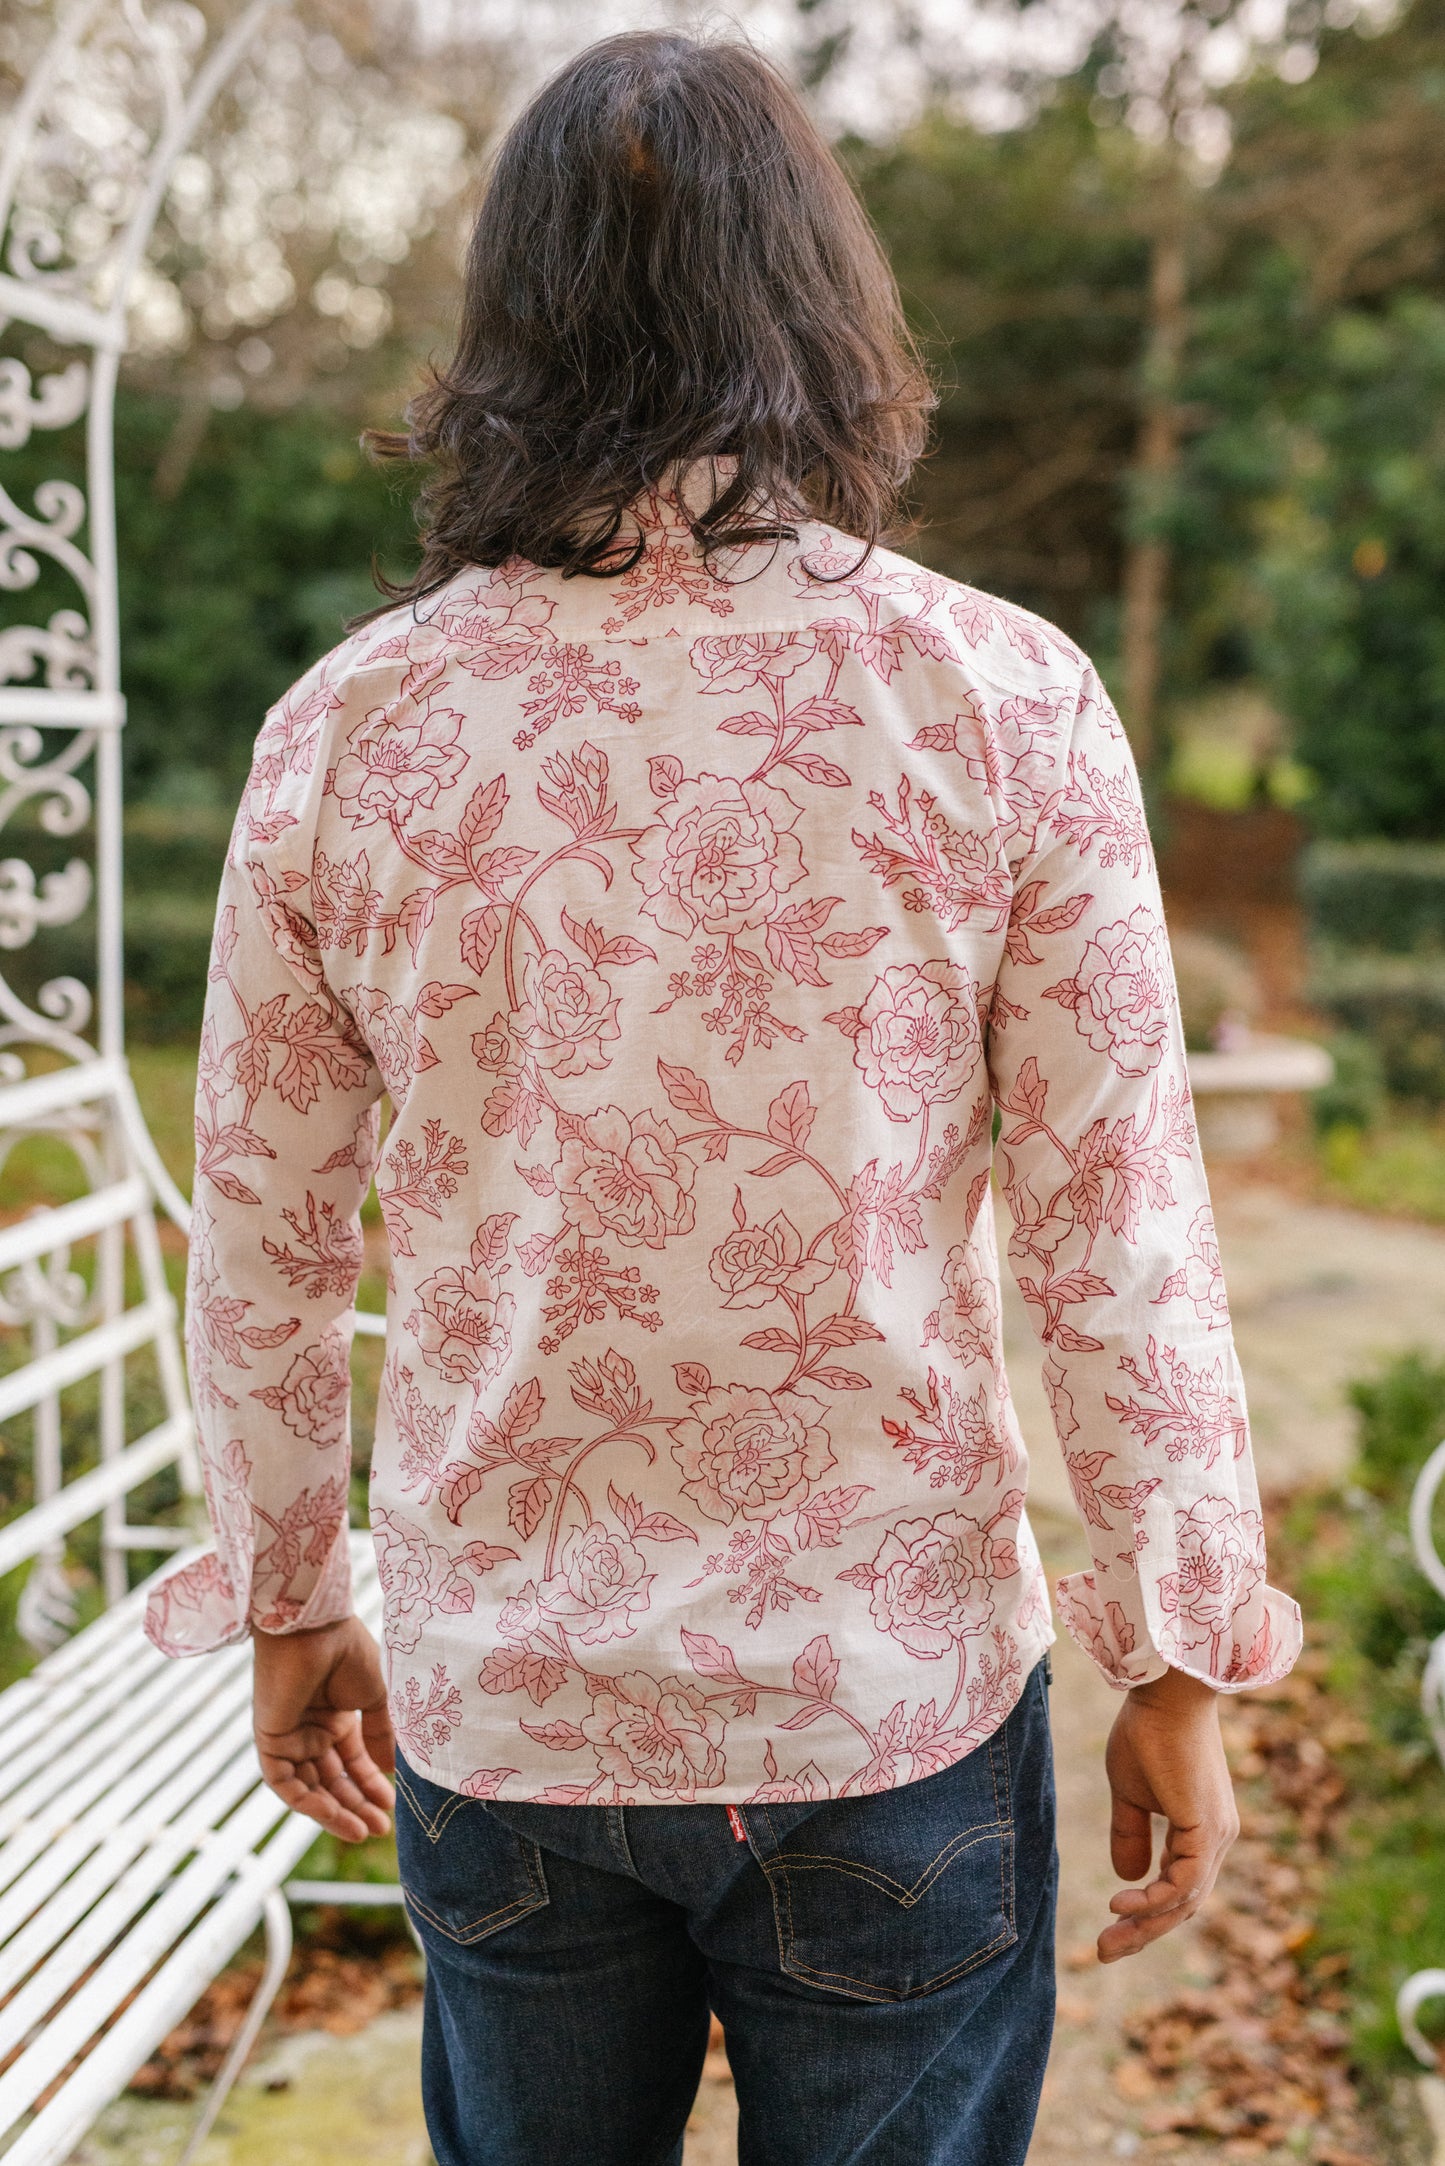 Men's Shirt in Pink Floral Retro